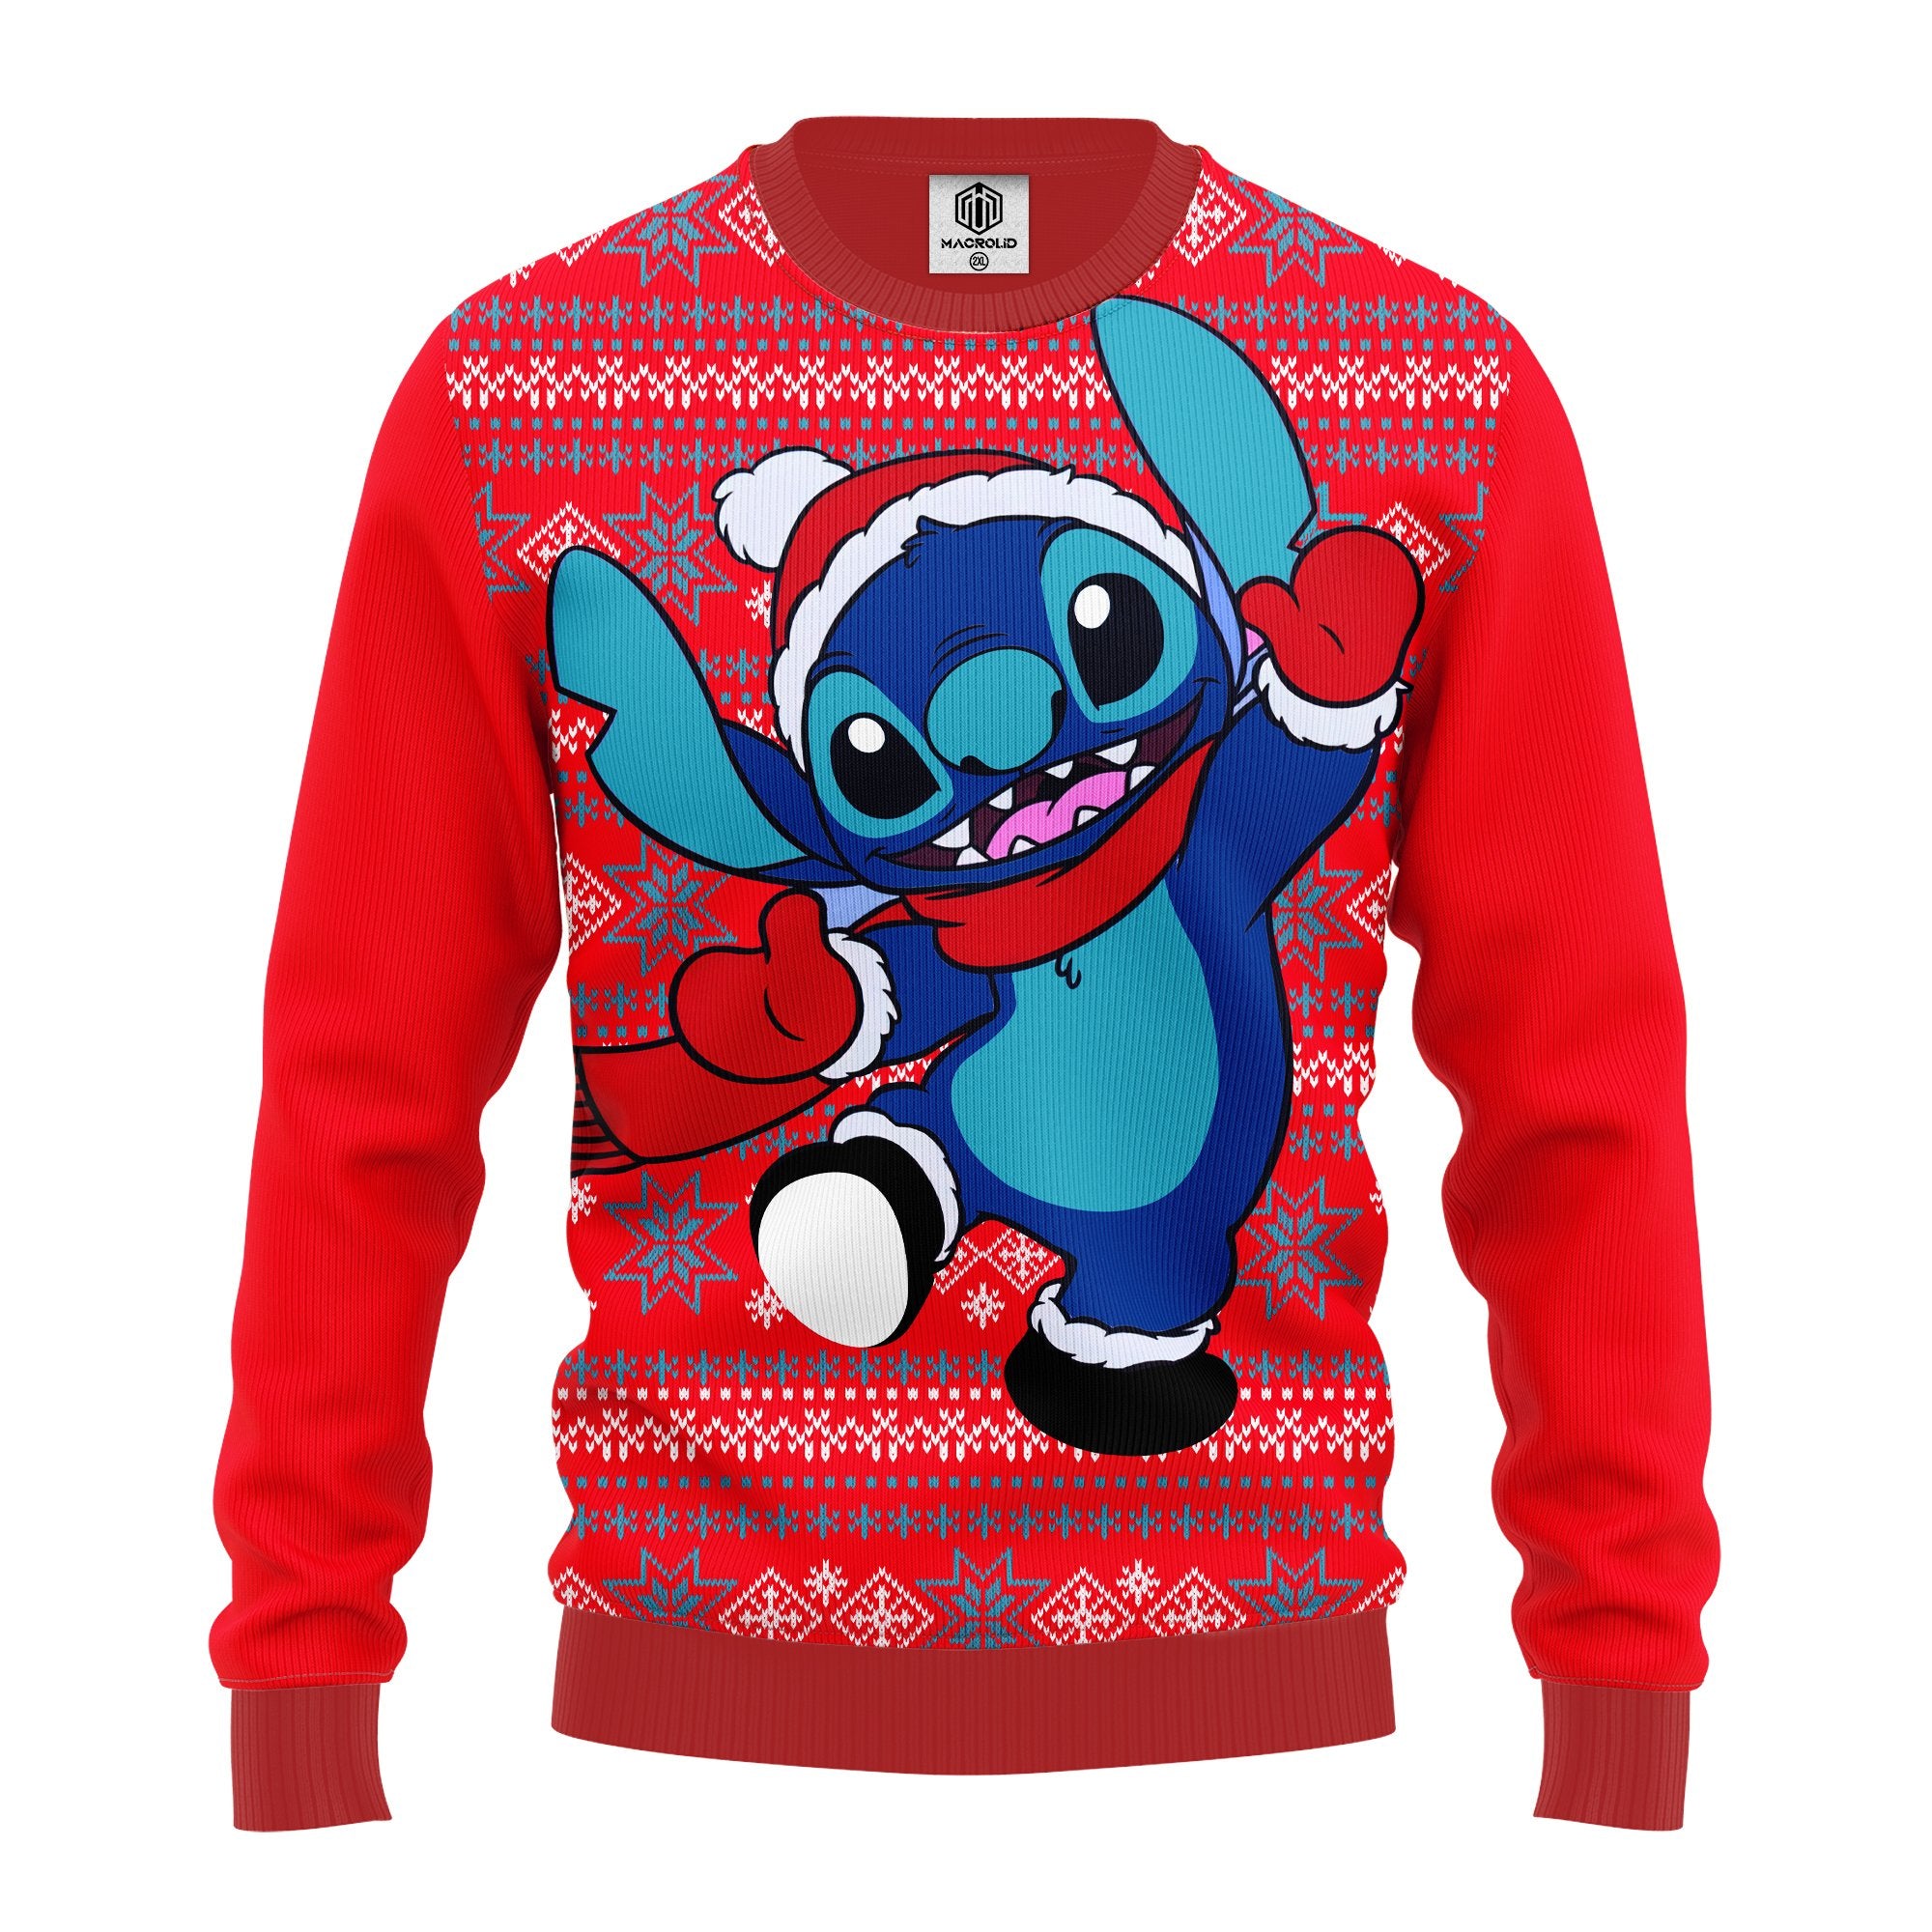 Stitch Winter Red Ugly Christmas Sweater Amazing Gift Idea Thanksgiving Gift